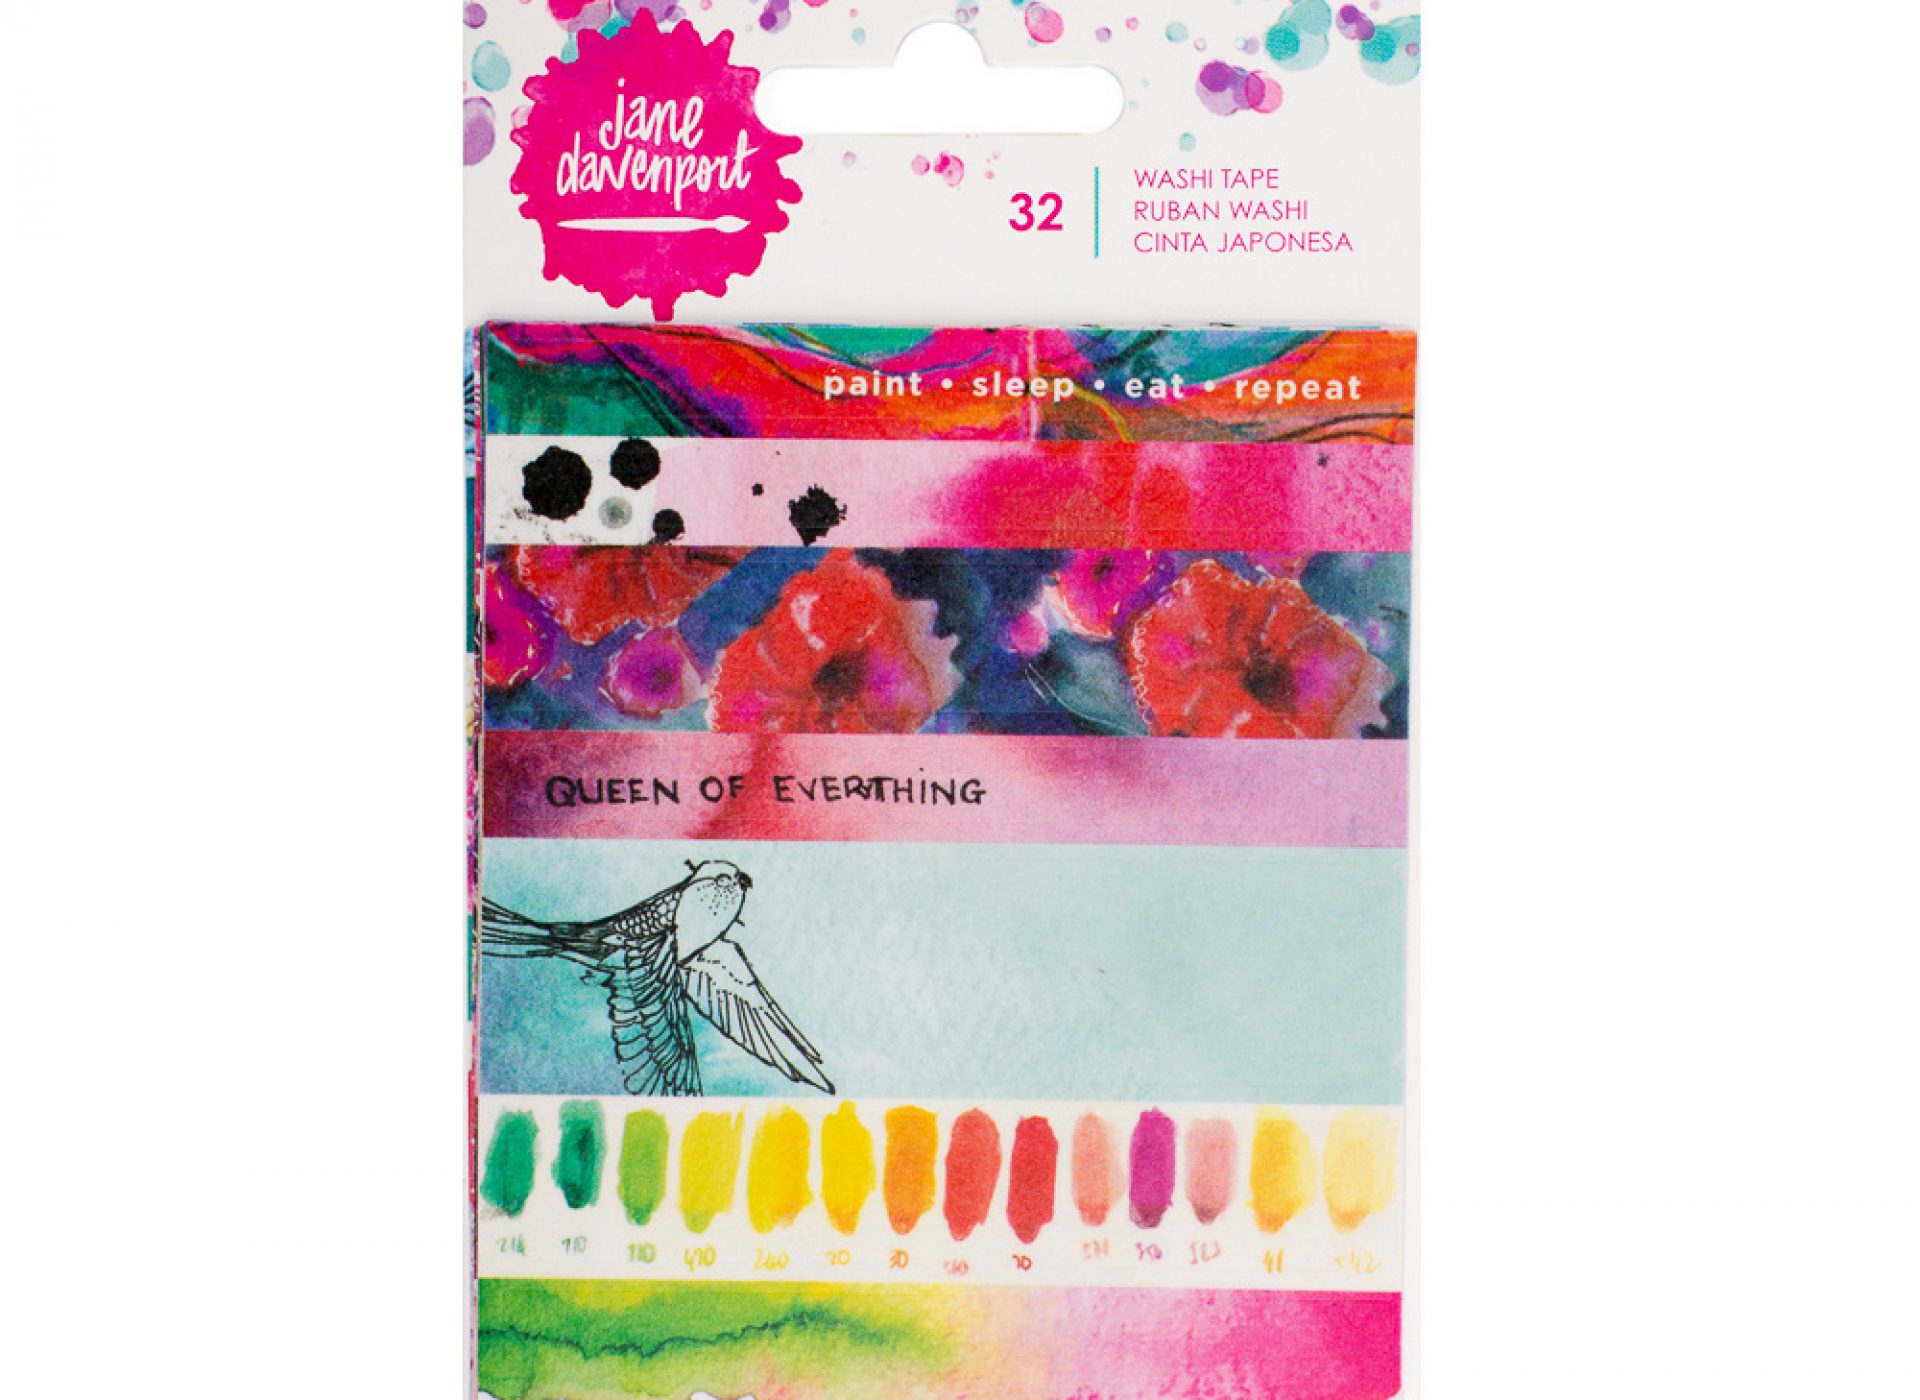 Washi sticker pages, Paint Phrases by Jane Davenport